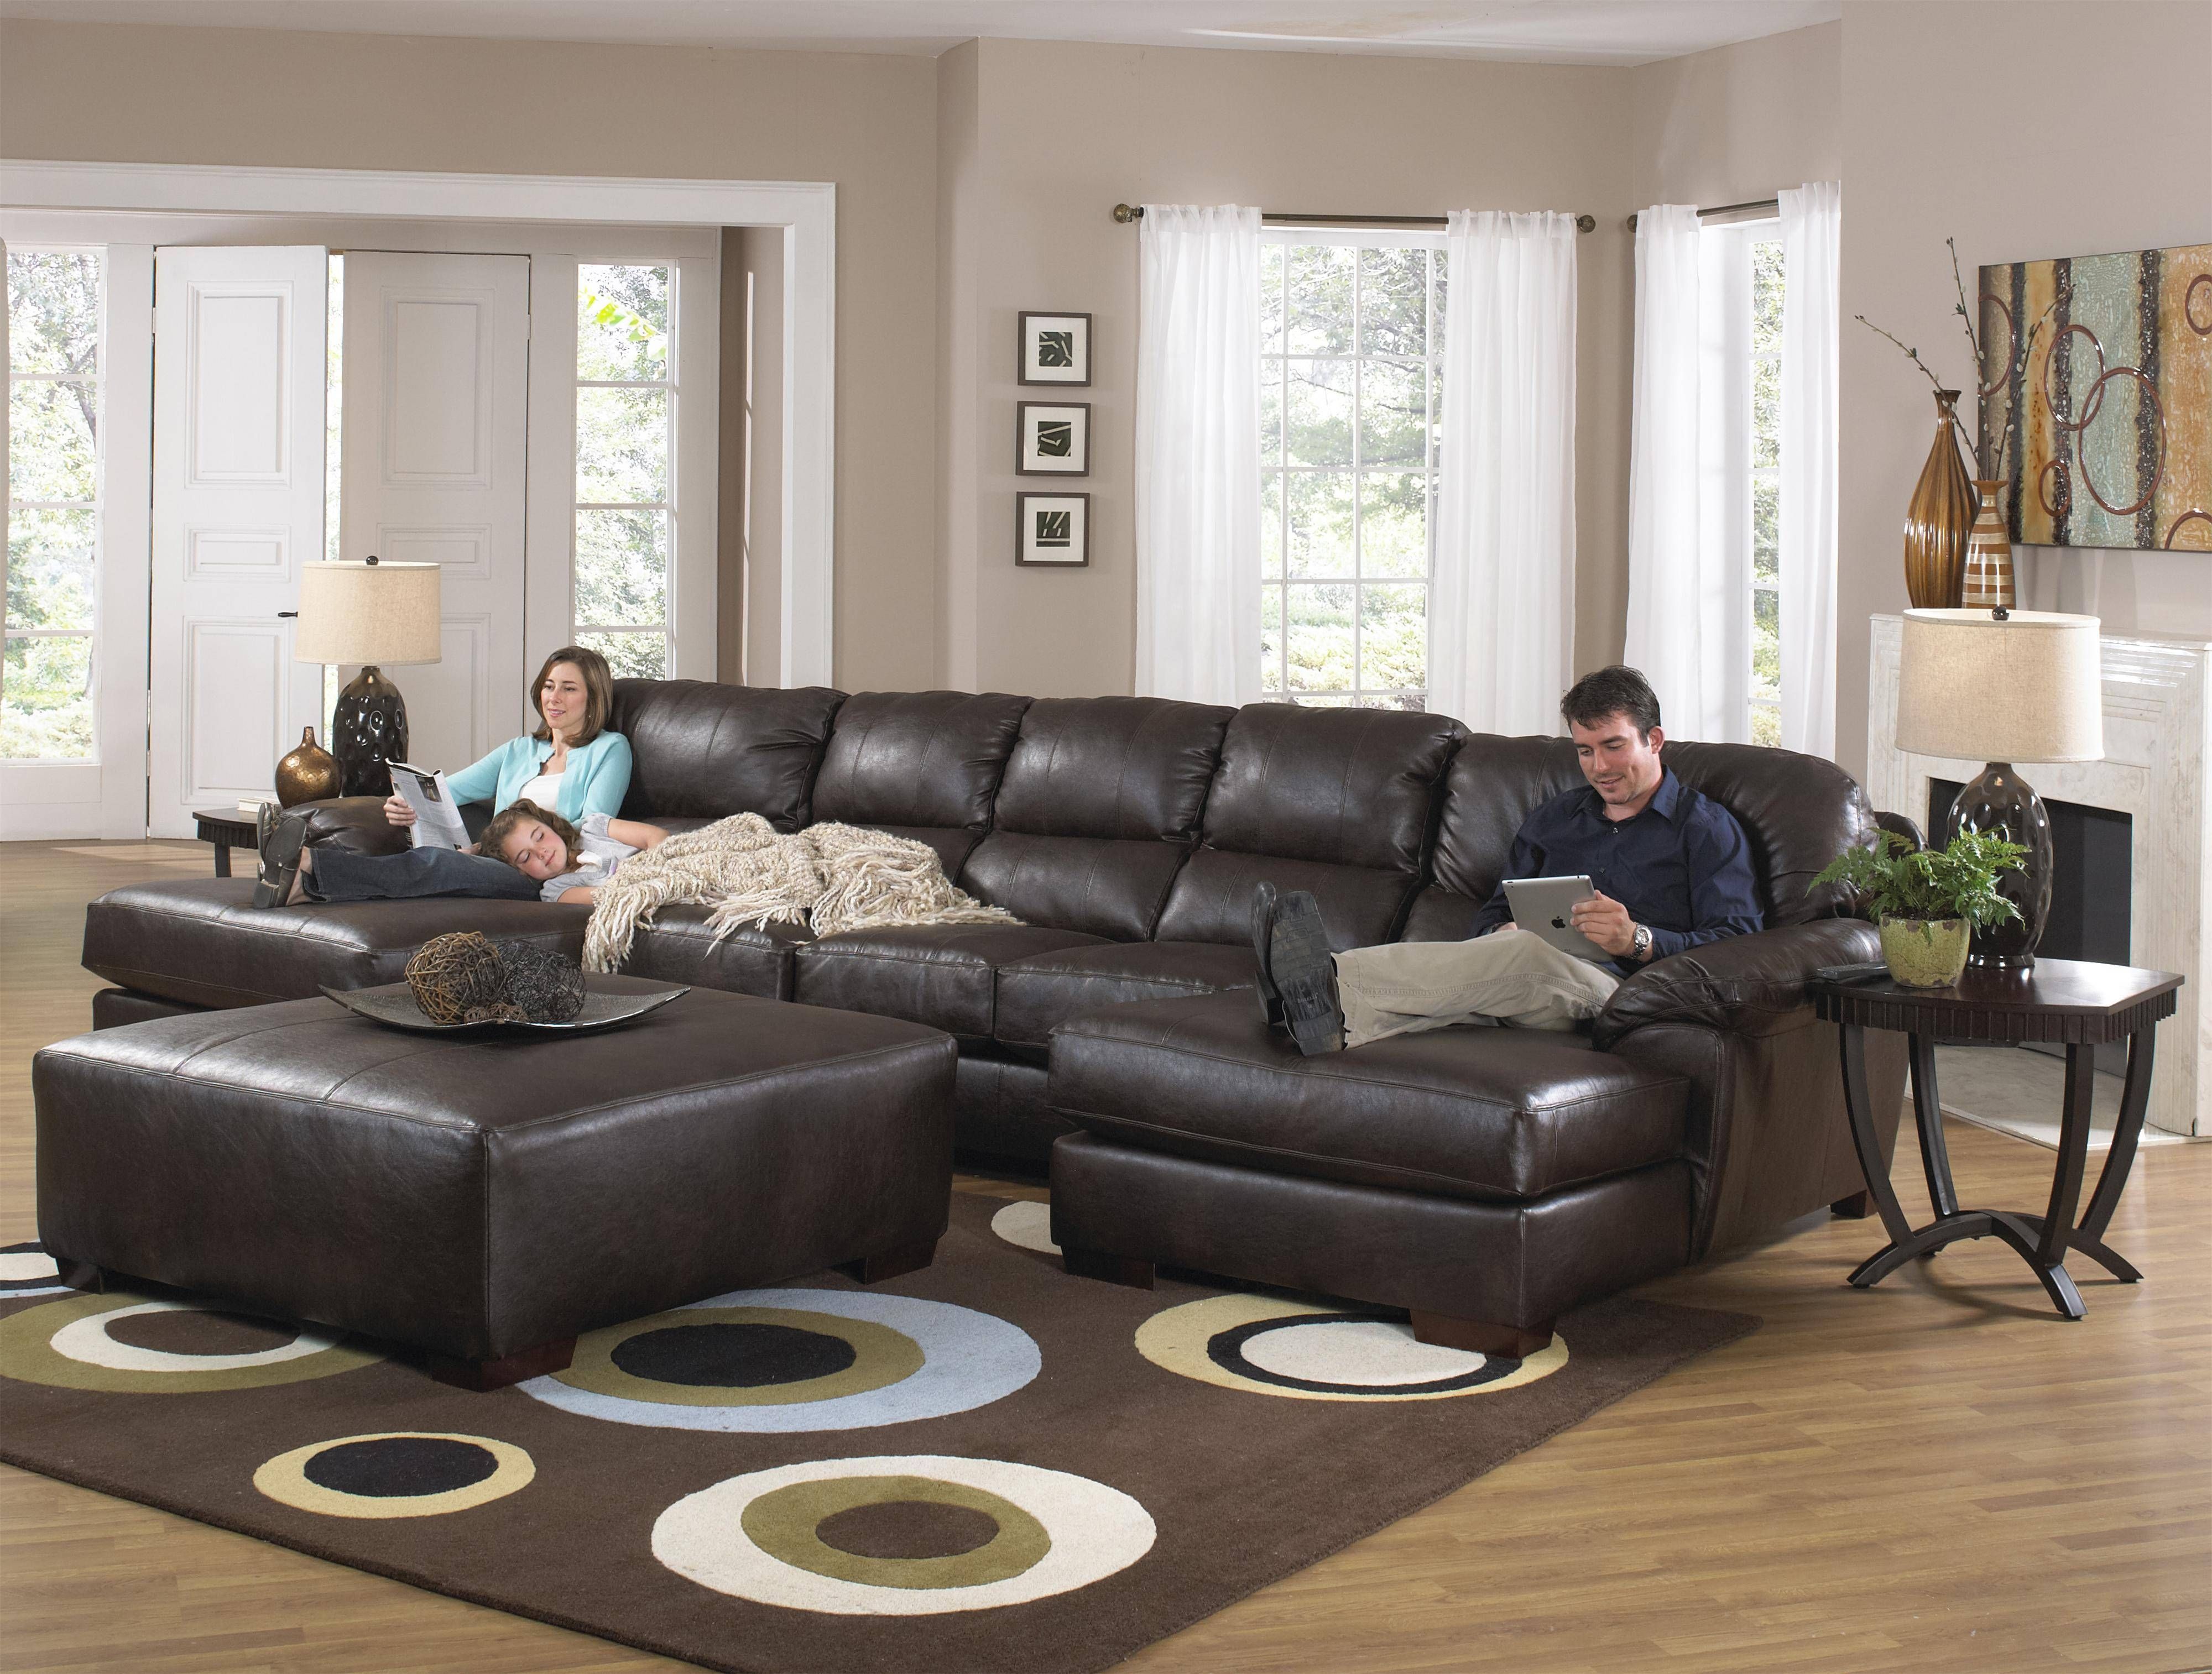 Jackson Furniture Lawson Three Seat Sectional Sofa With Console With Sofa With Chaise And Ottoman (View 23 of 30)